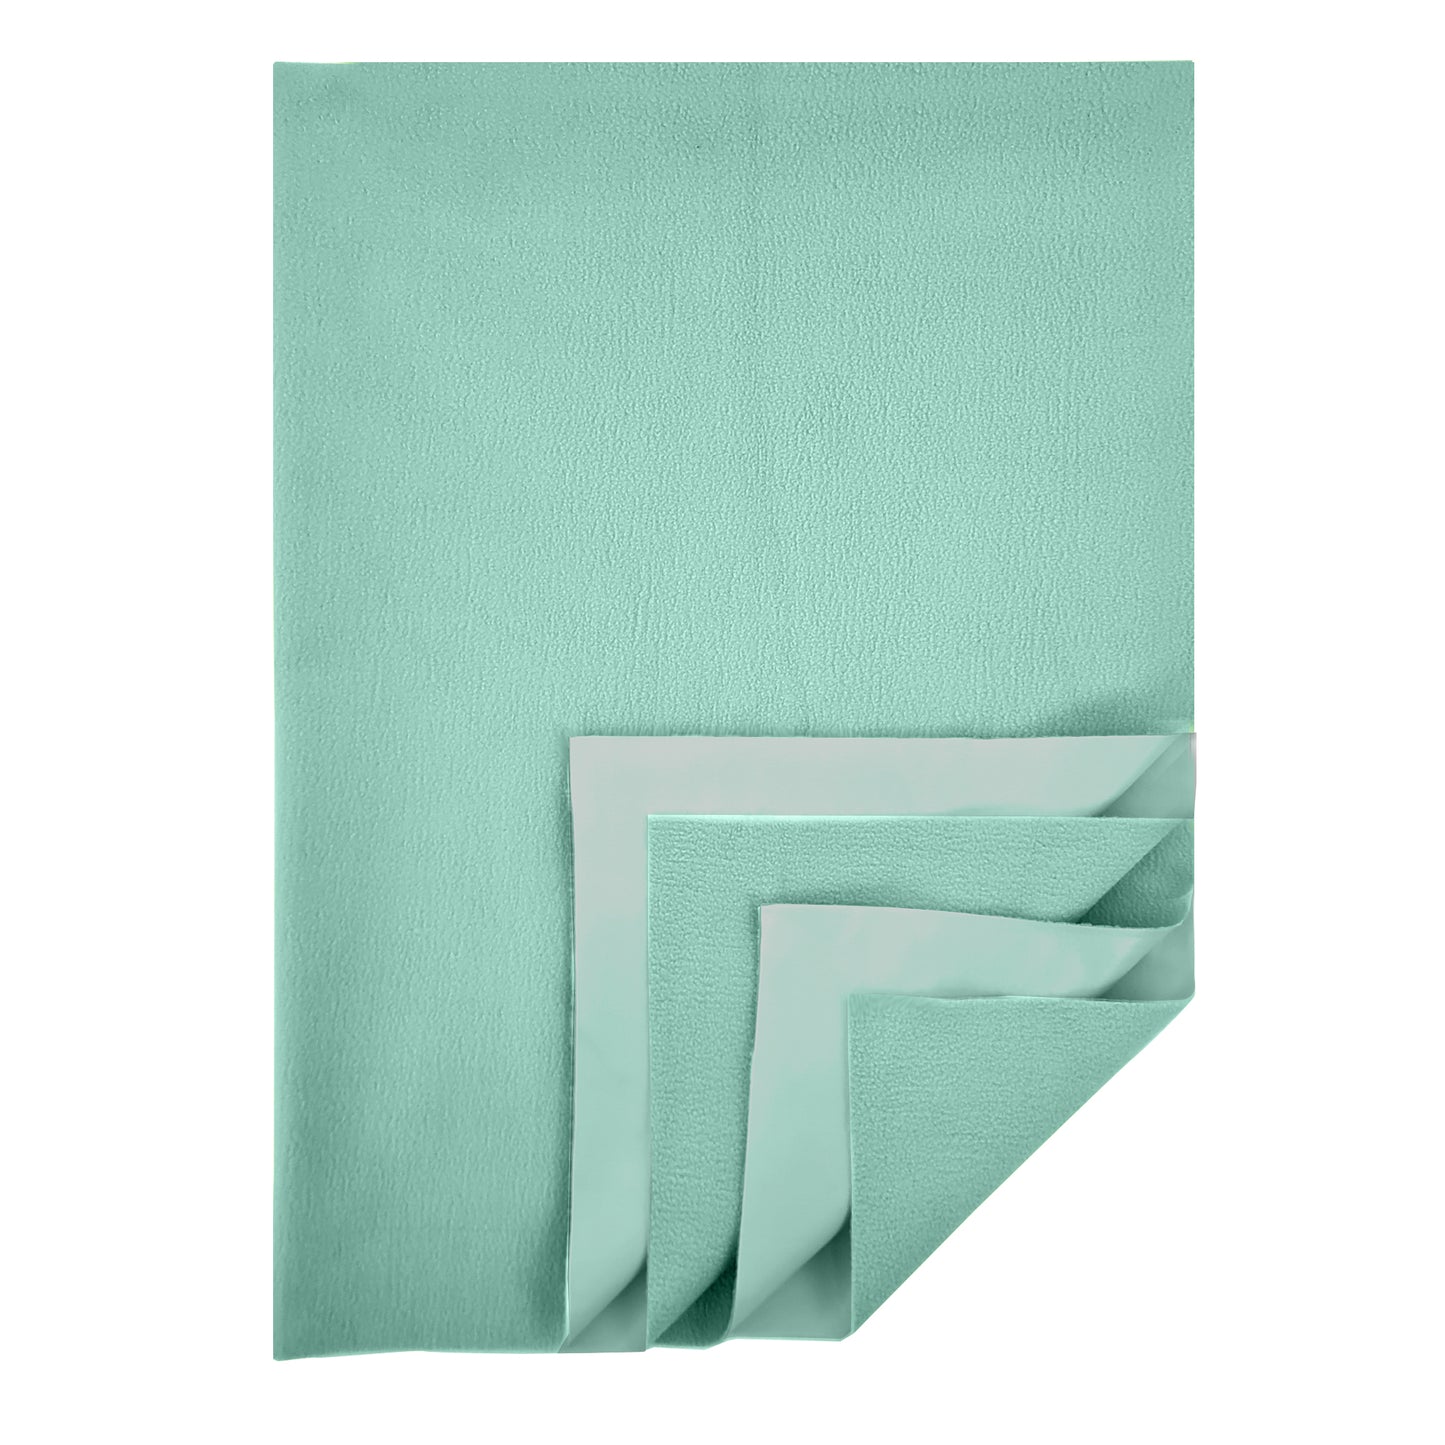 Waterproof Quick Dry Protector Sheet, Baby Bed Protecto (140 X 100 CM), Pack of 1 -SEA GREEN